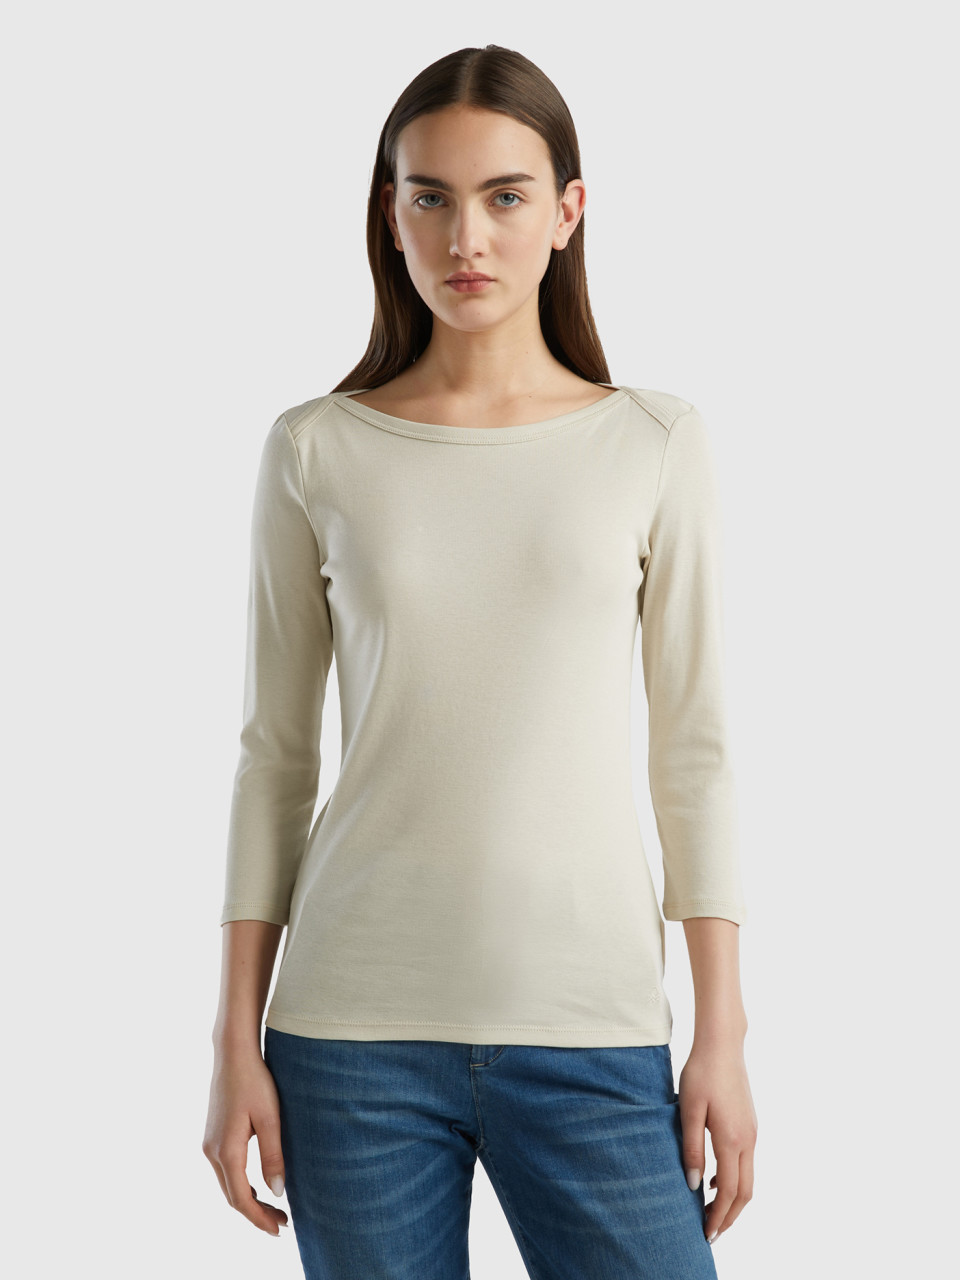 Benetton, T-shirt With Boat Neck In 100% Cotton, Beige, Women